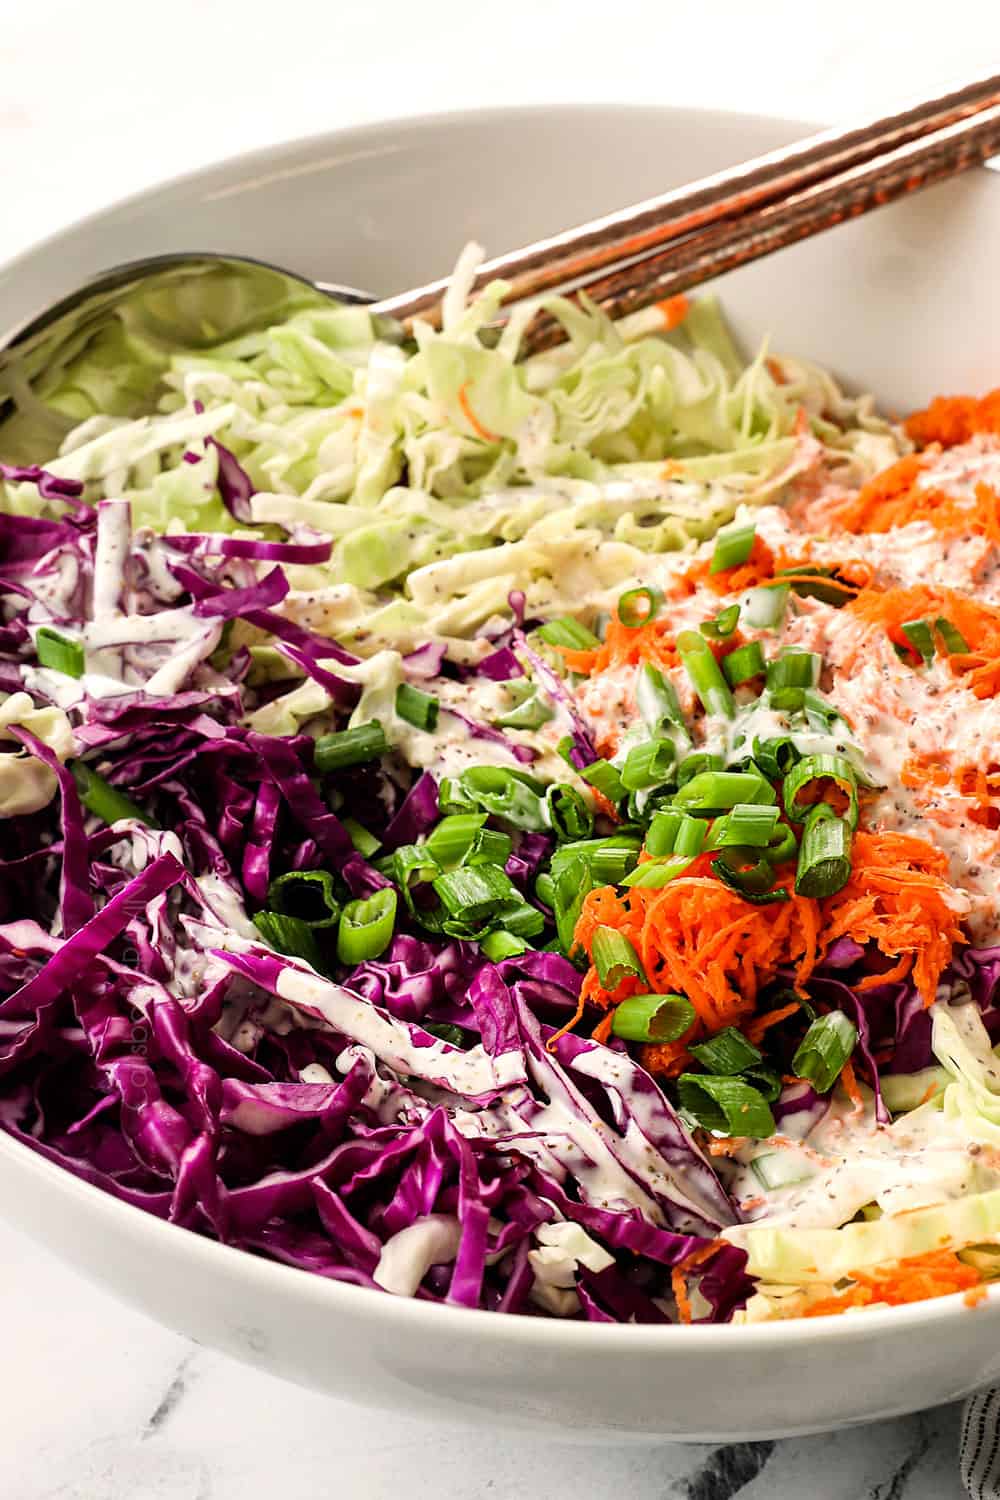 showing how to make traditional coleslaw by drizzling coleslaw dressing over the cabbage